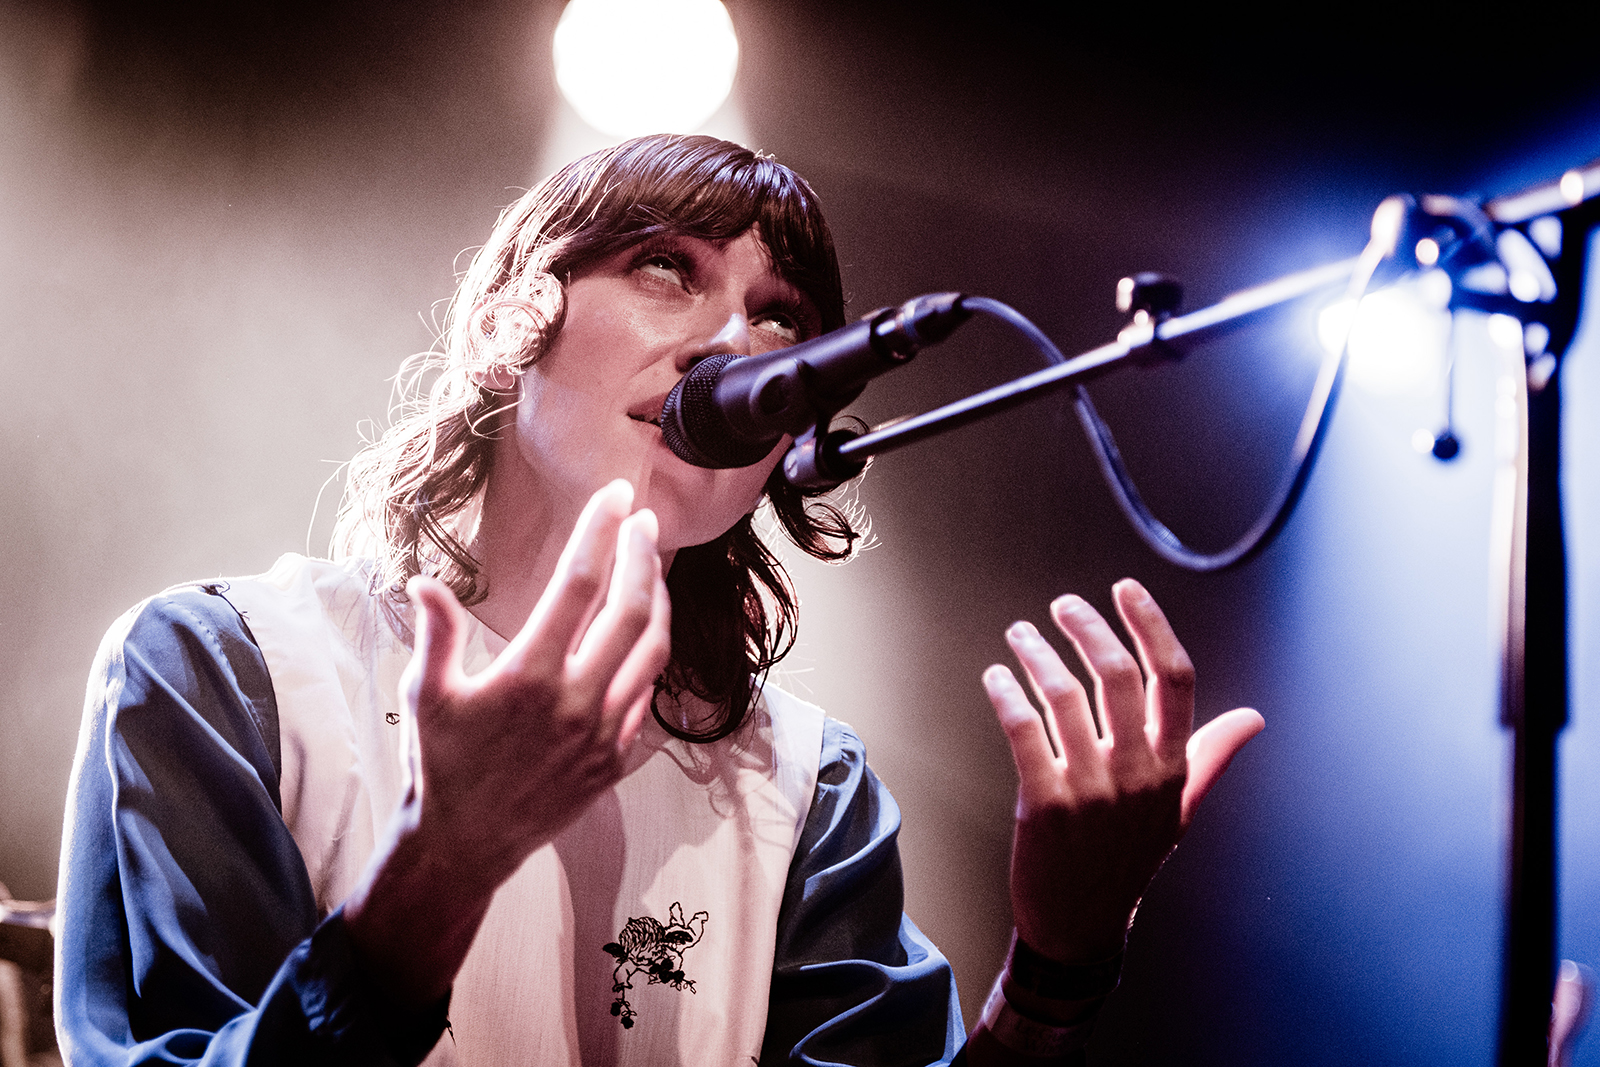 Video: Aldous Harding performs 'Designer' and 'The Barrel' live at Le Guess Who? 2019